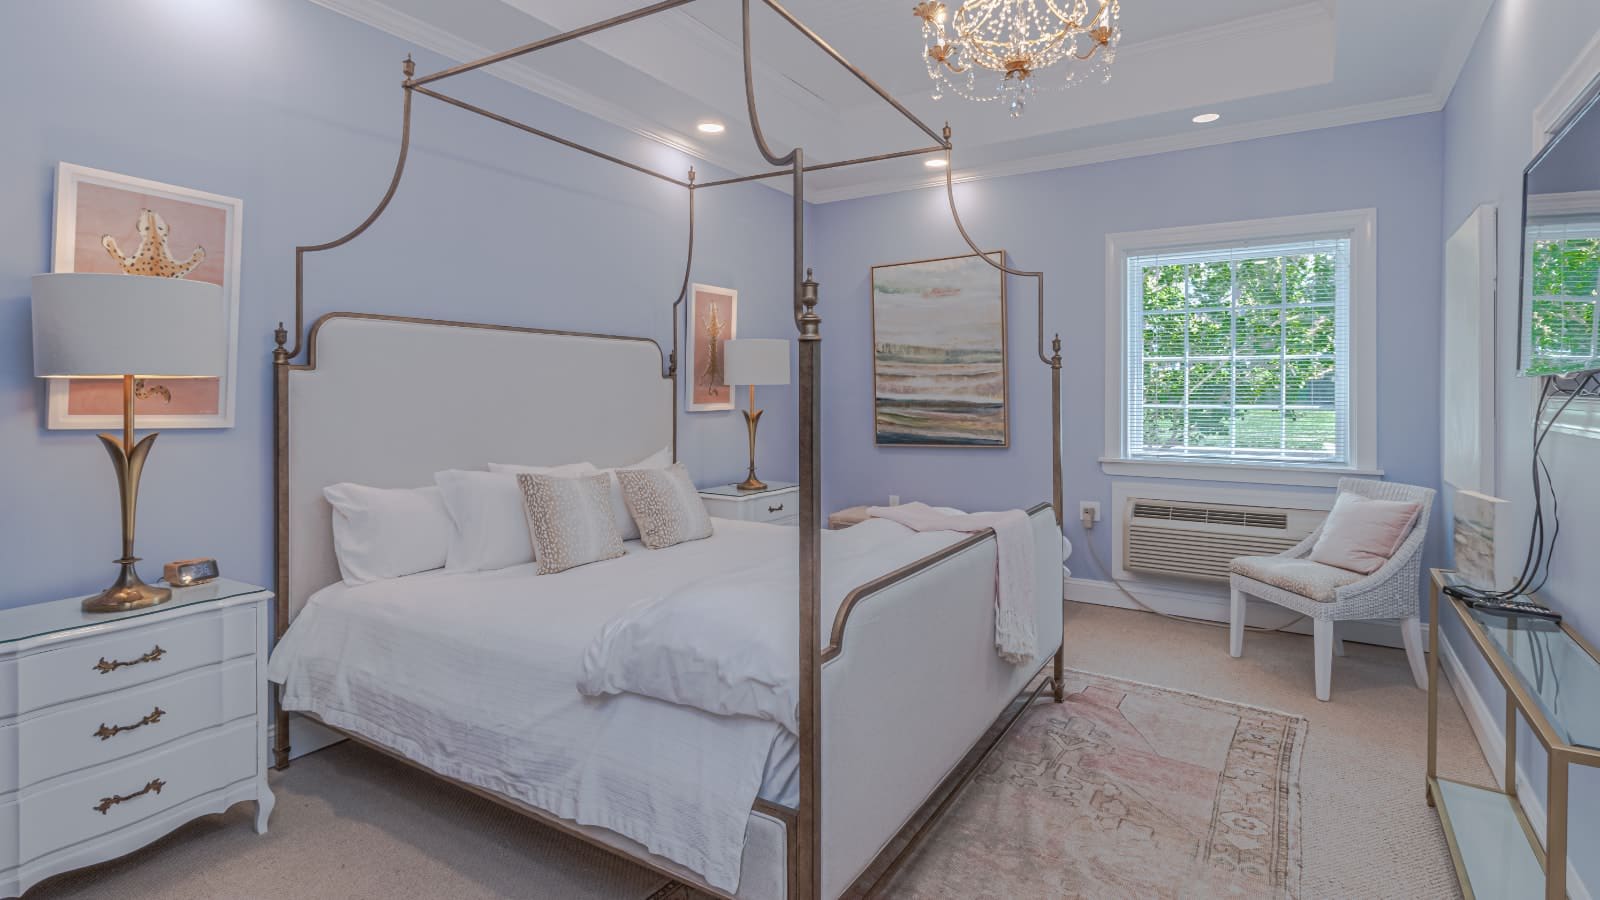 Bedroom with light lavender walls, carpeting, metal four poster bed, white bedding, white dressers, and white wicker chair